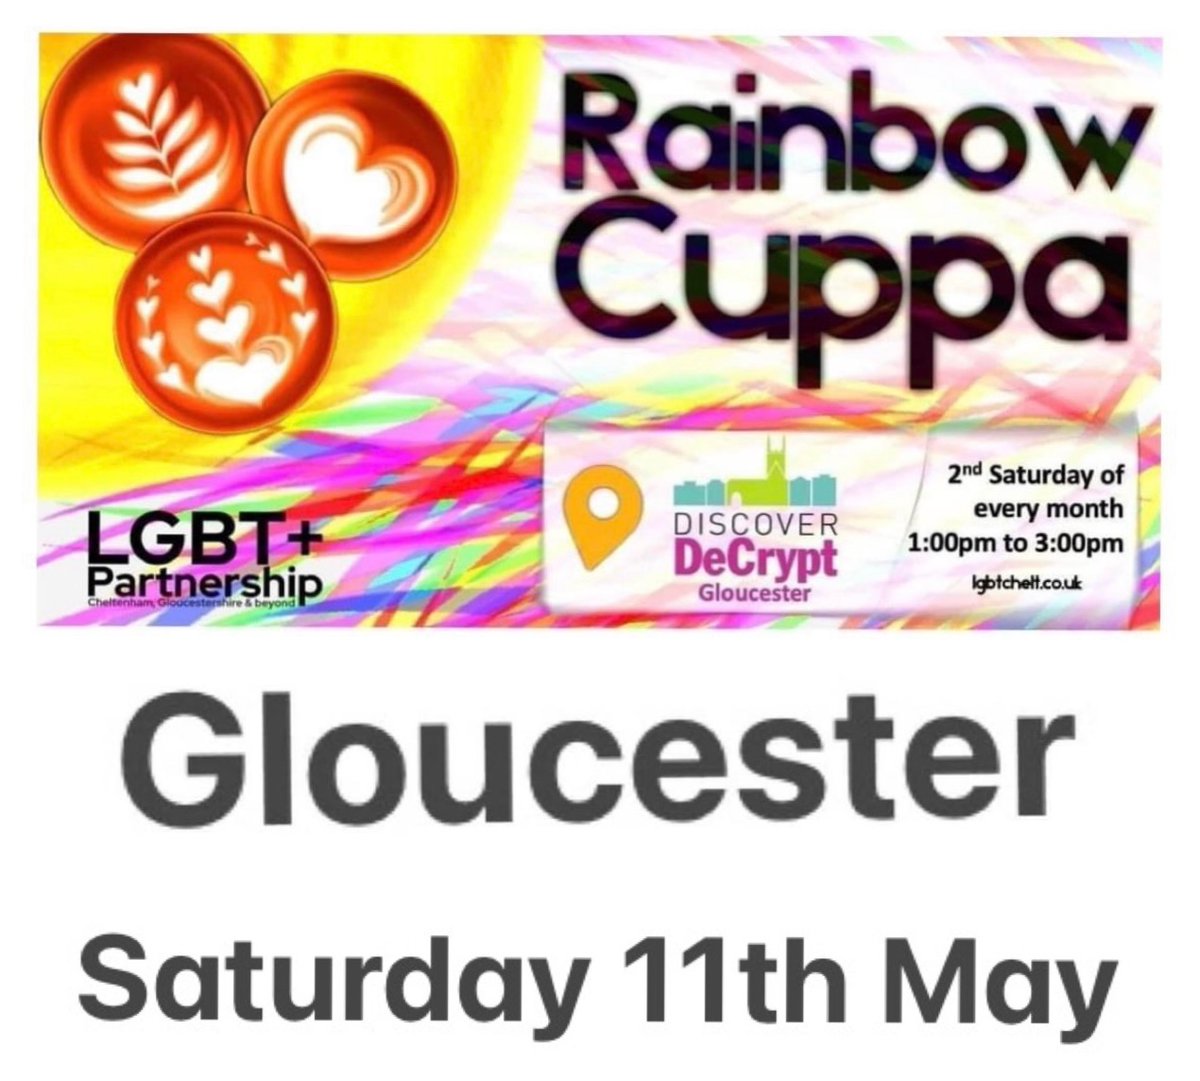 #Gloucester get your diary 🌈 The next Gloucester Rainbow Cuppa will be on the afternoon of EUROVISION FINAL DAY, Saturday May 11th, at the DeCrypt Community Cafe. This is an accessible venue. Come say Hallå, Bonjour and Hello! See you there! 🌈